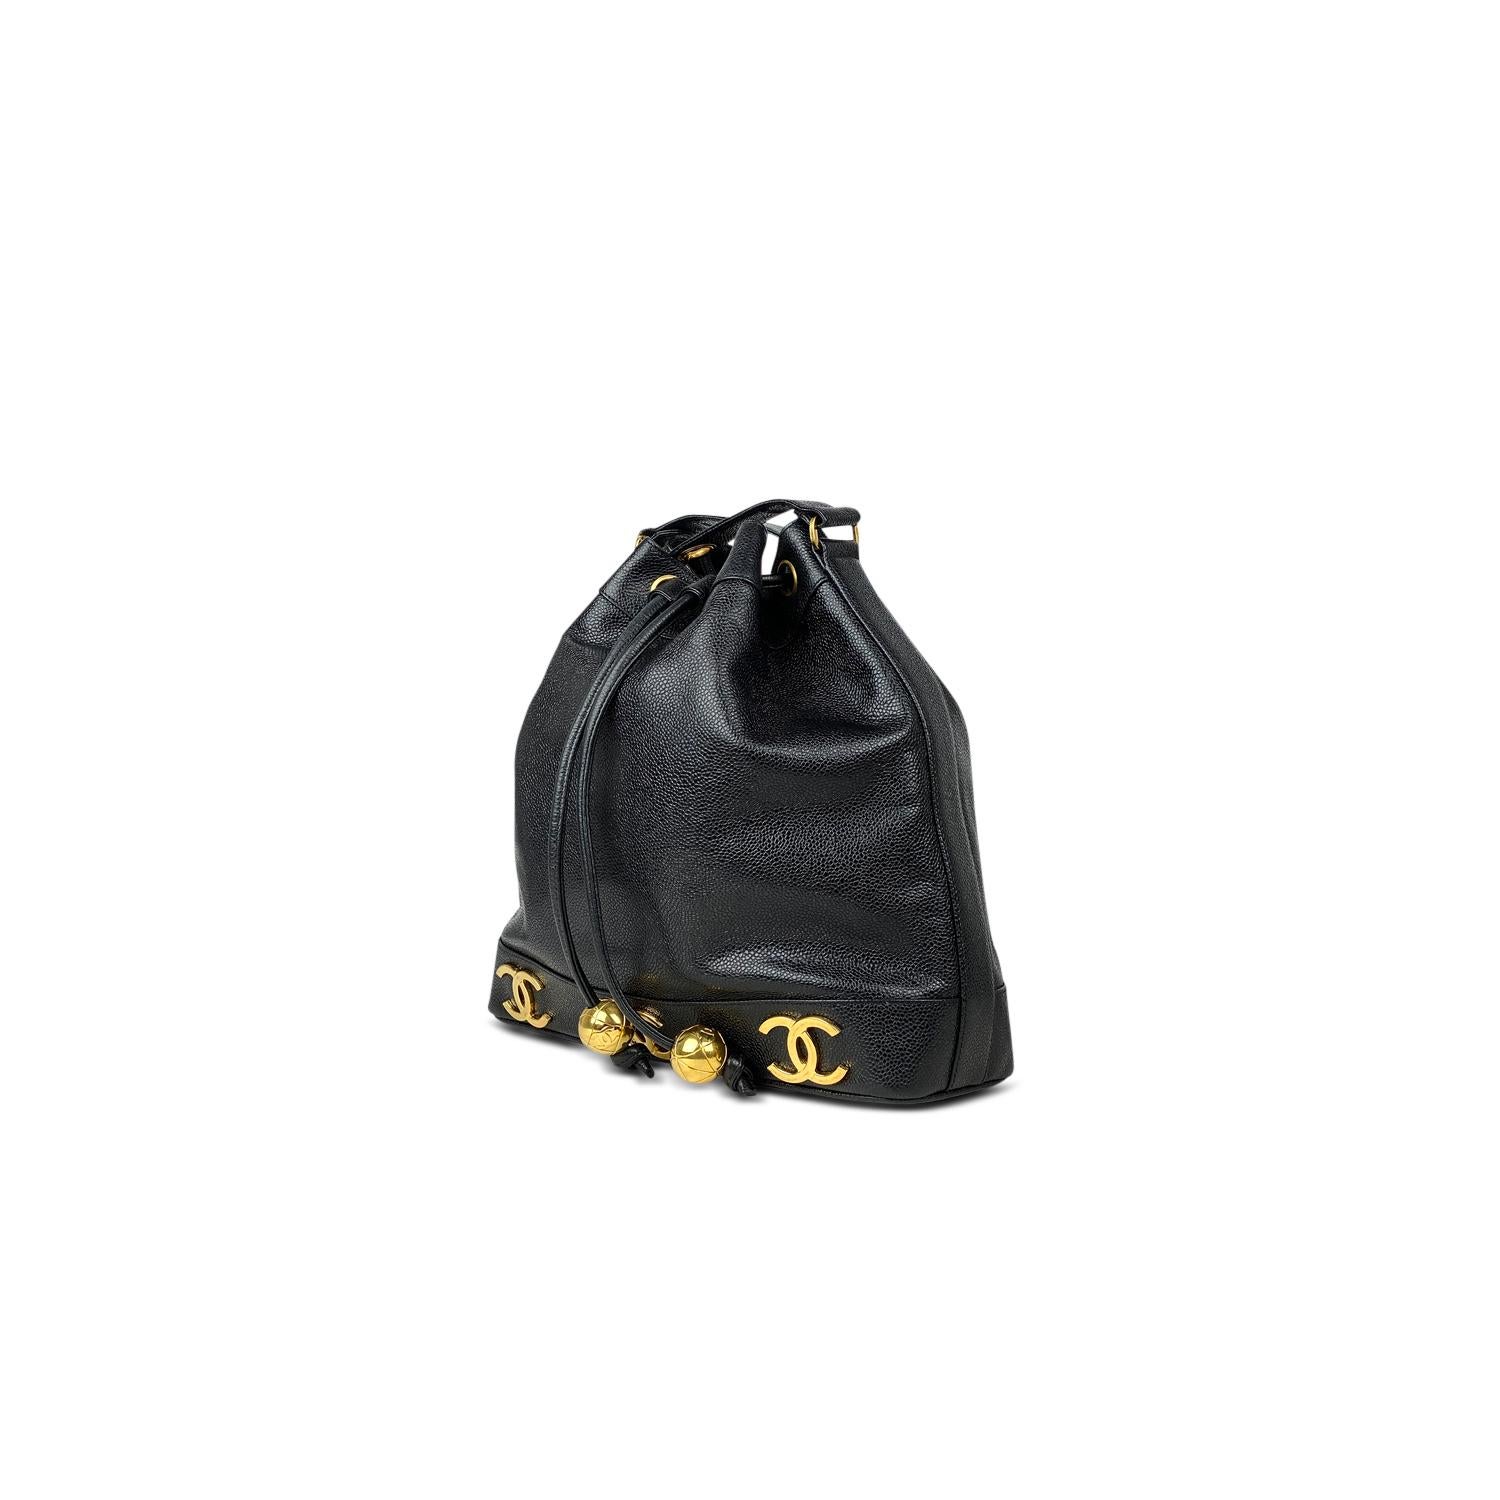 Black Caviar leather Chanel bucket bag with

- Gold-tone hardware
- Dual chain-link and leather shoulder strap
- CC logo adornments at exterior
- Tonal leather interior and drawstring closure at front flap featuring round logo adornments

Overall